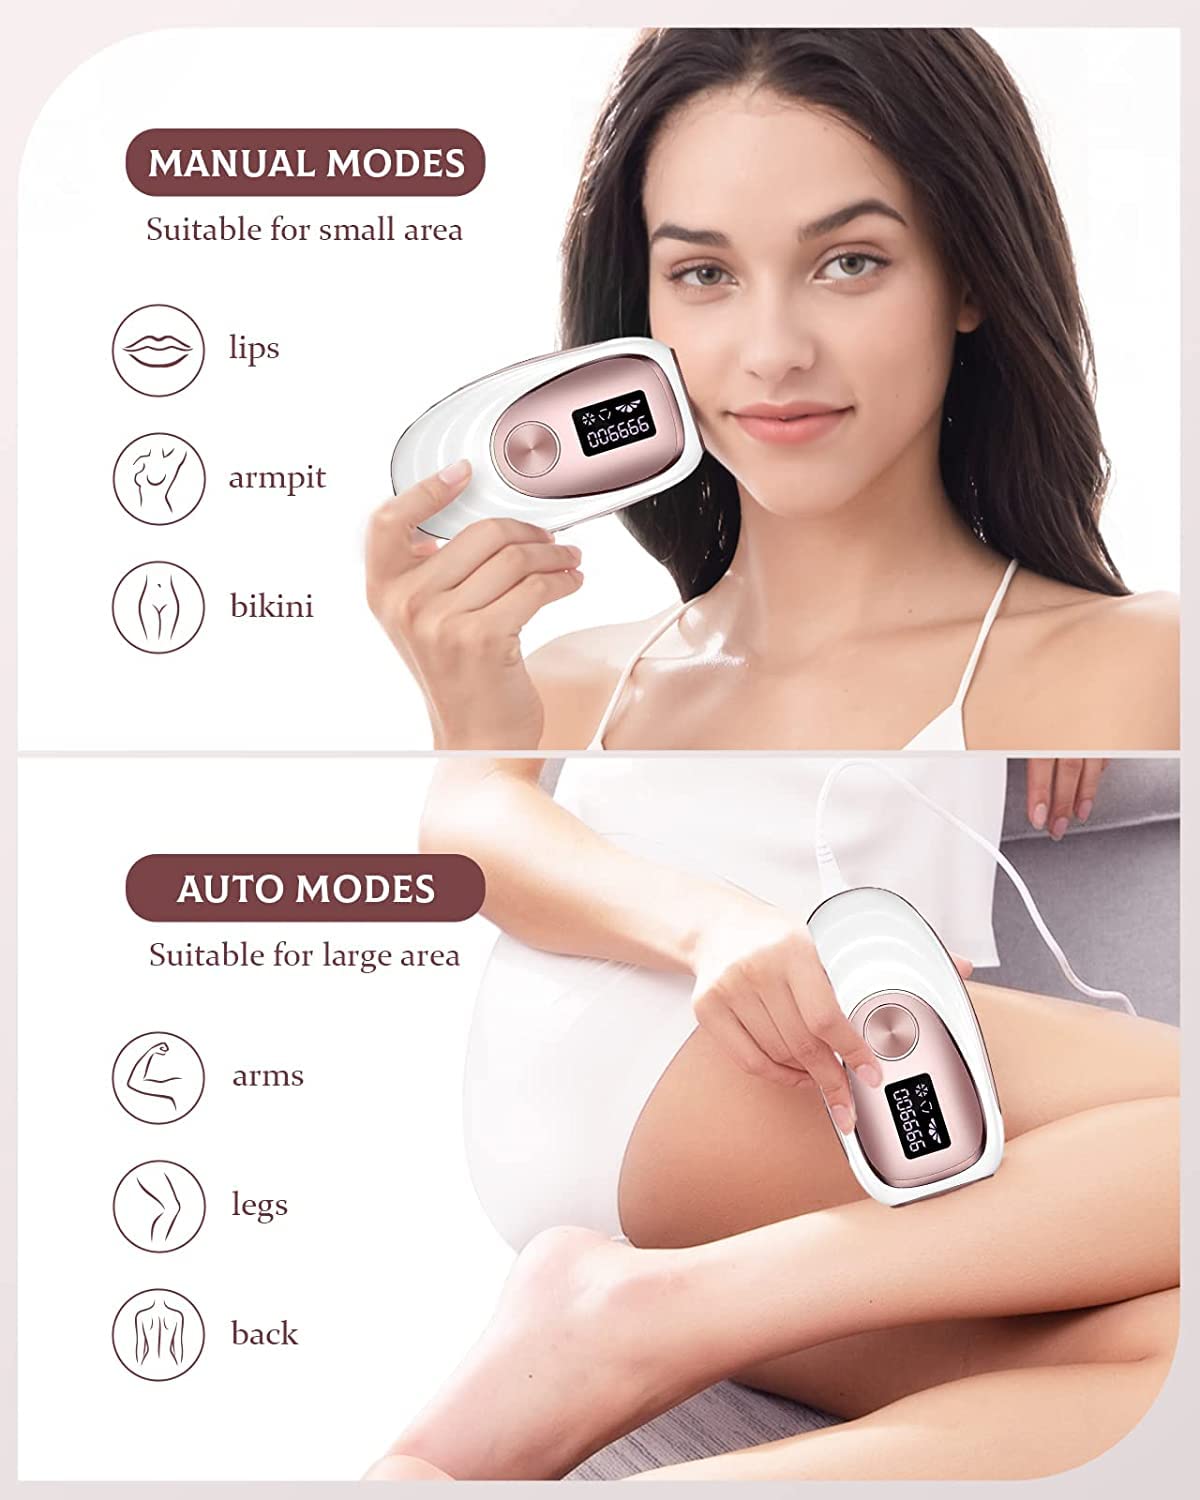 TM002 IPL Devices Hair Removal